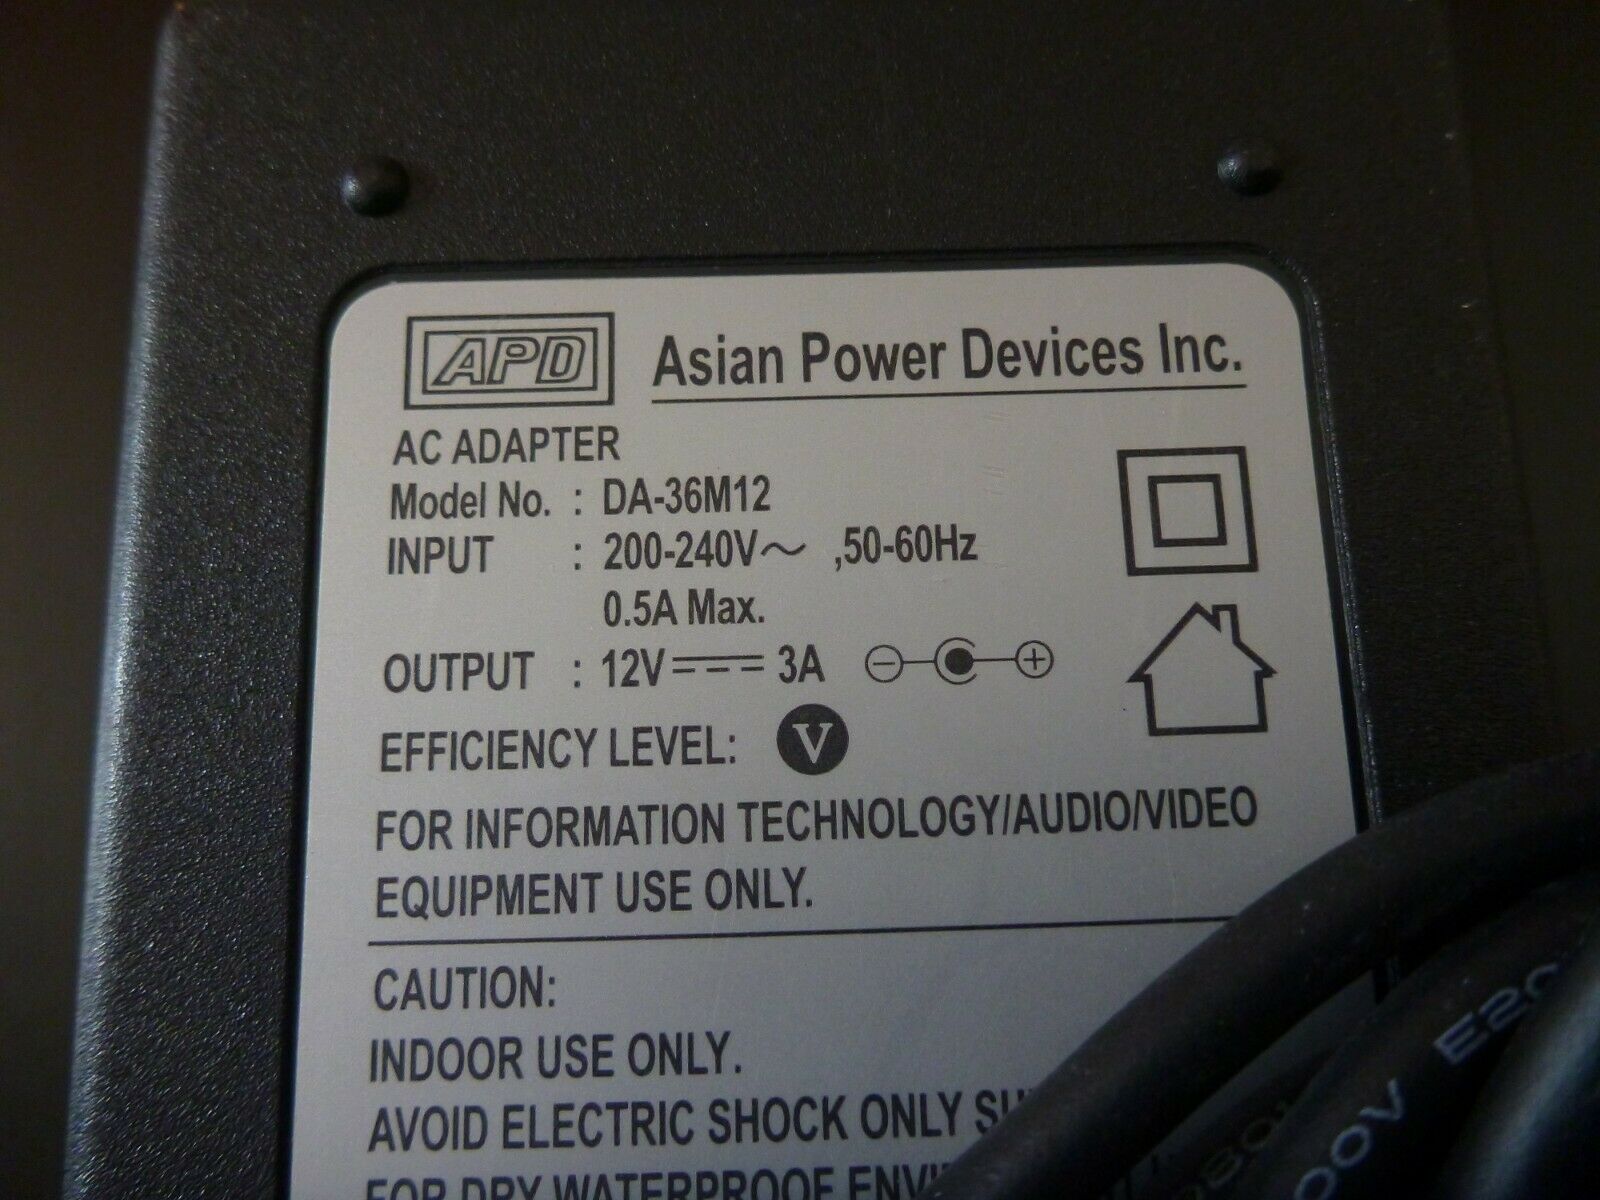 AC 3A, GENUINE APD ASIAN POWER DA-36M12 AC ADAPTER, LED Power Adapter Brand: APD Type: AC/AC Adapter Output Voltage